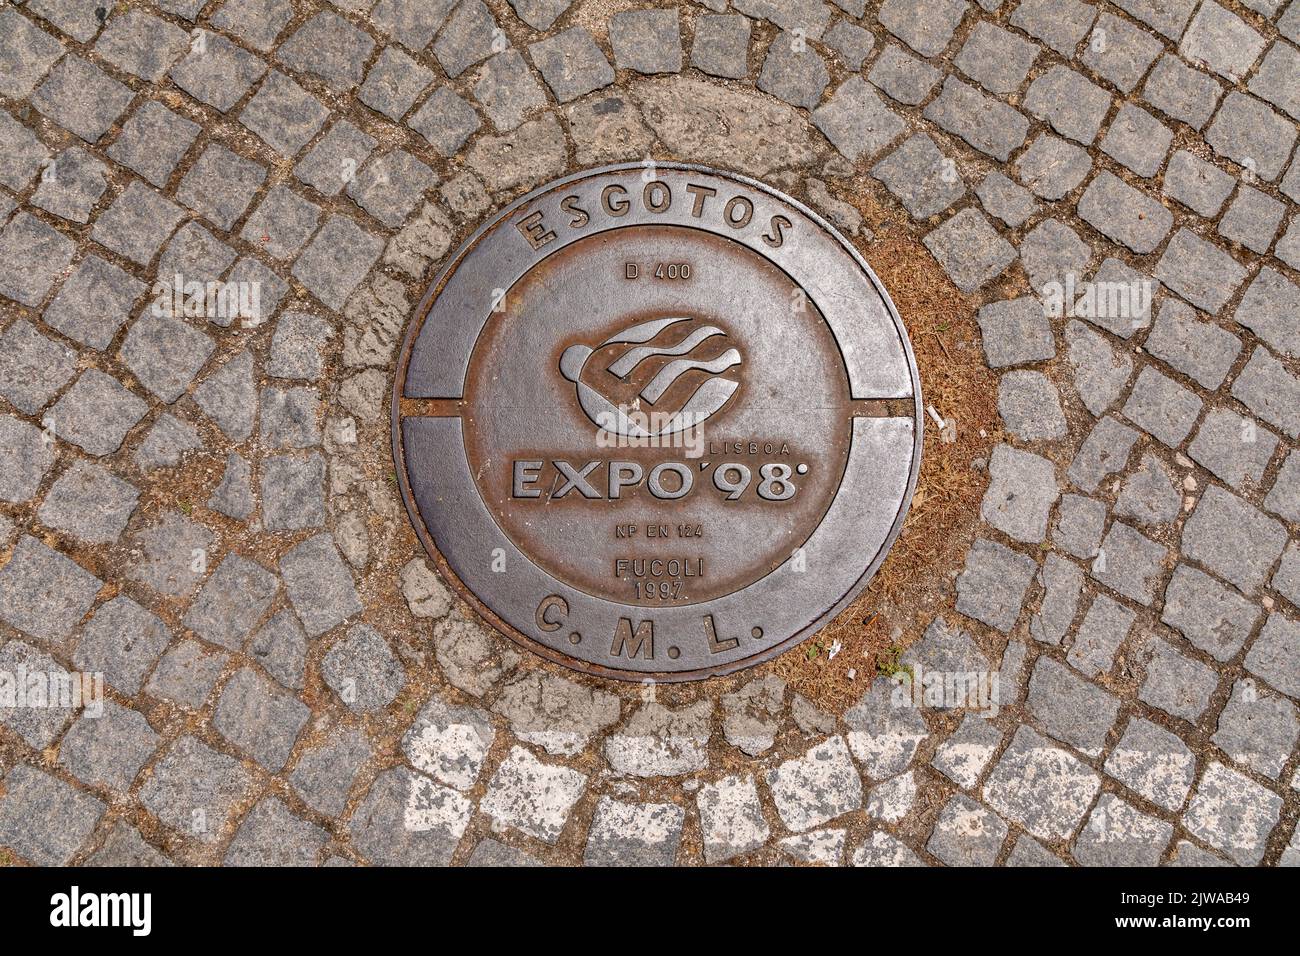 A manhole cover of Expo '98 at the Expo site in Lisbon, Portugal Stock Photo